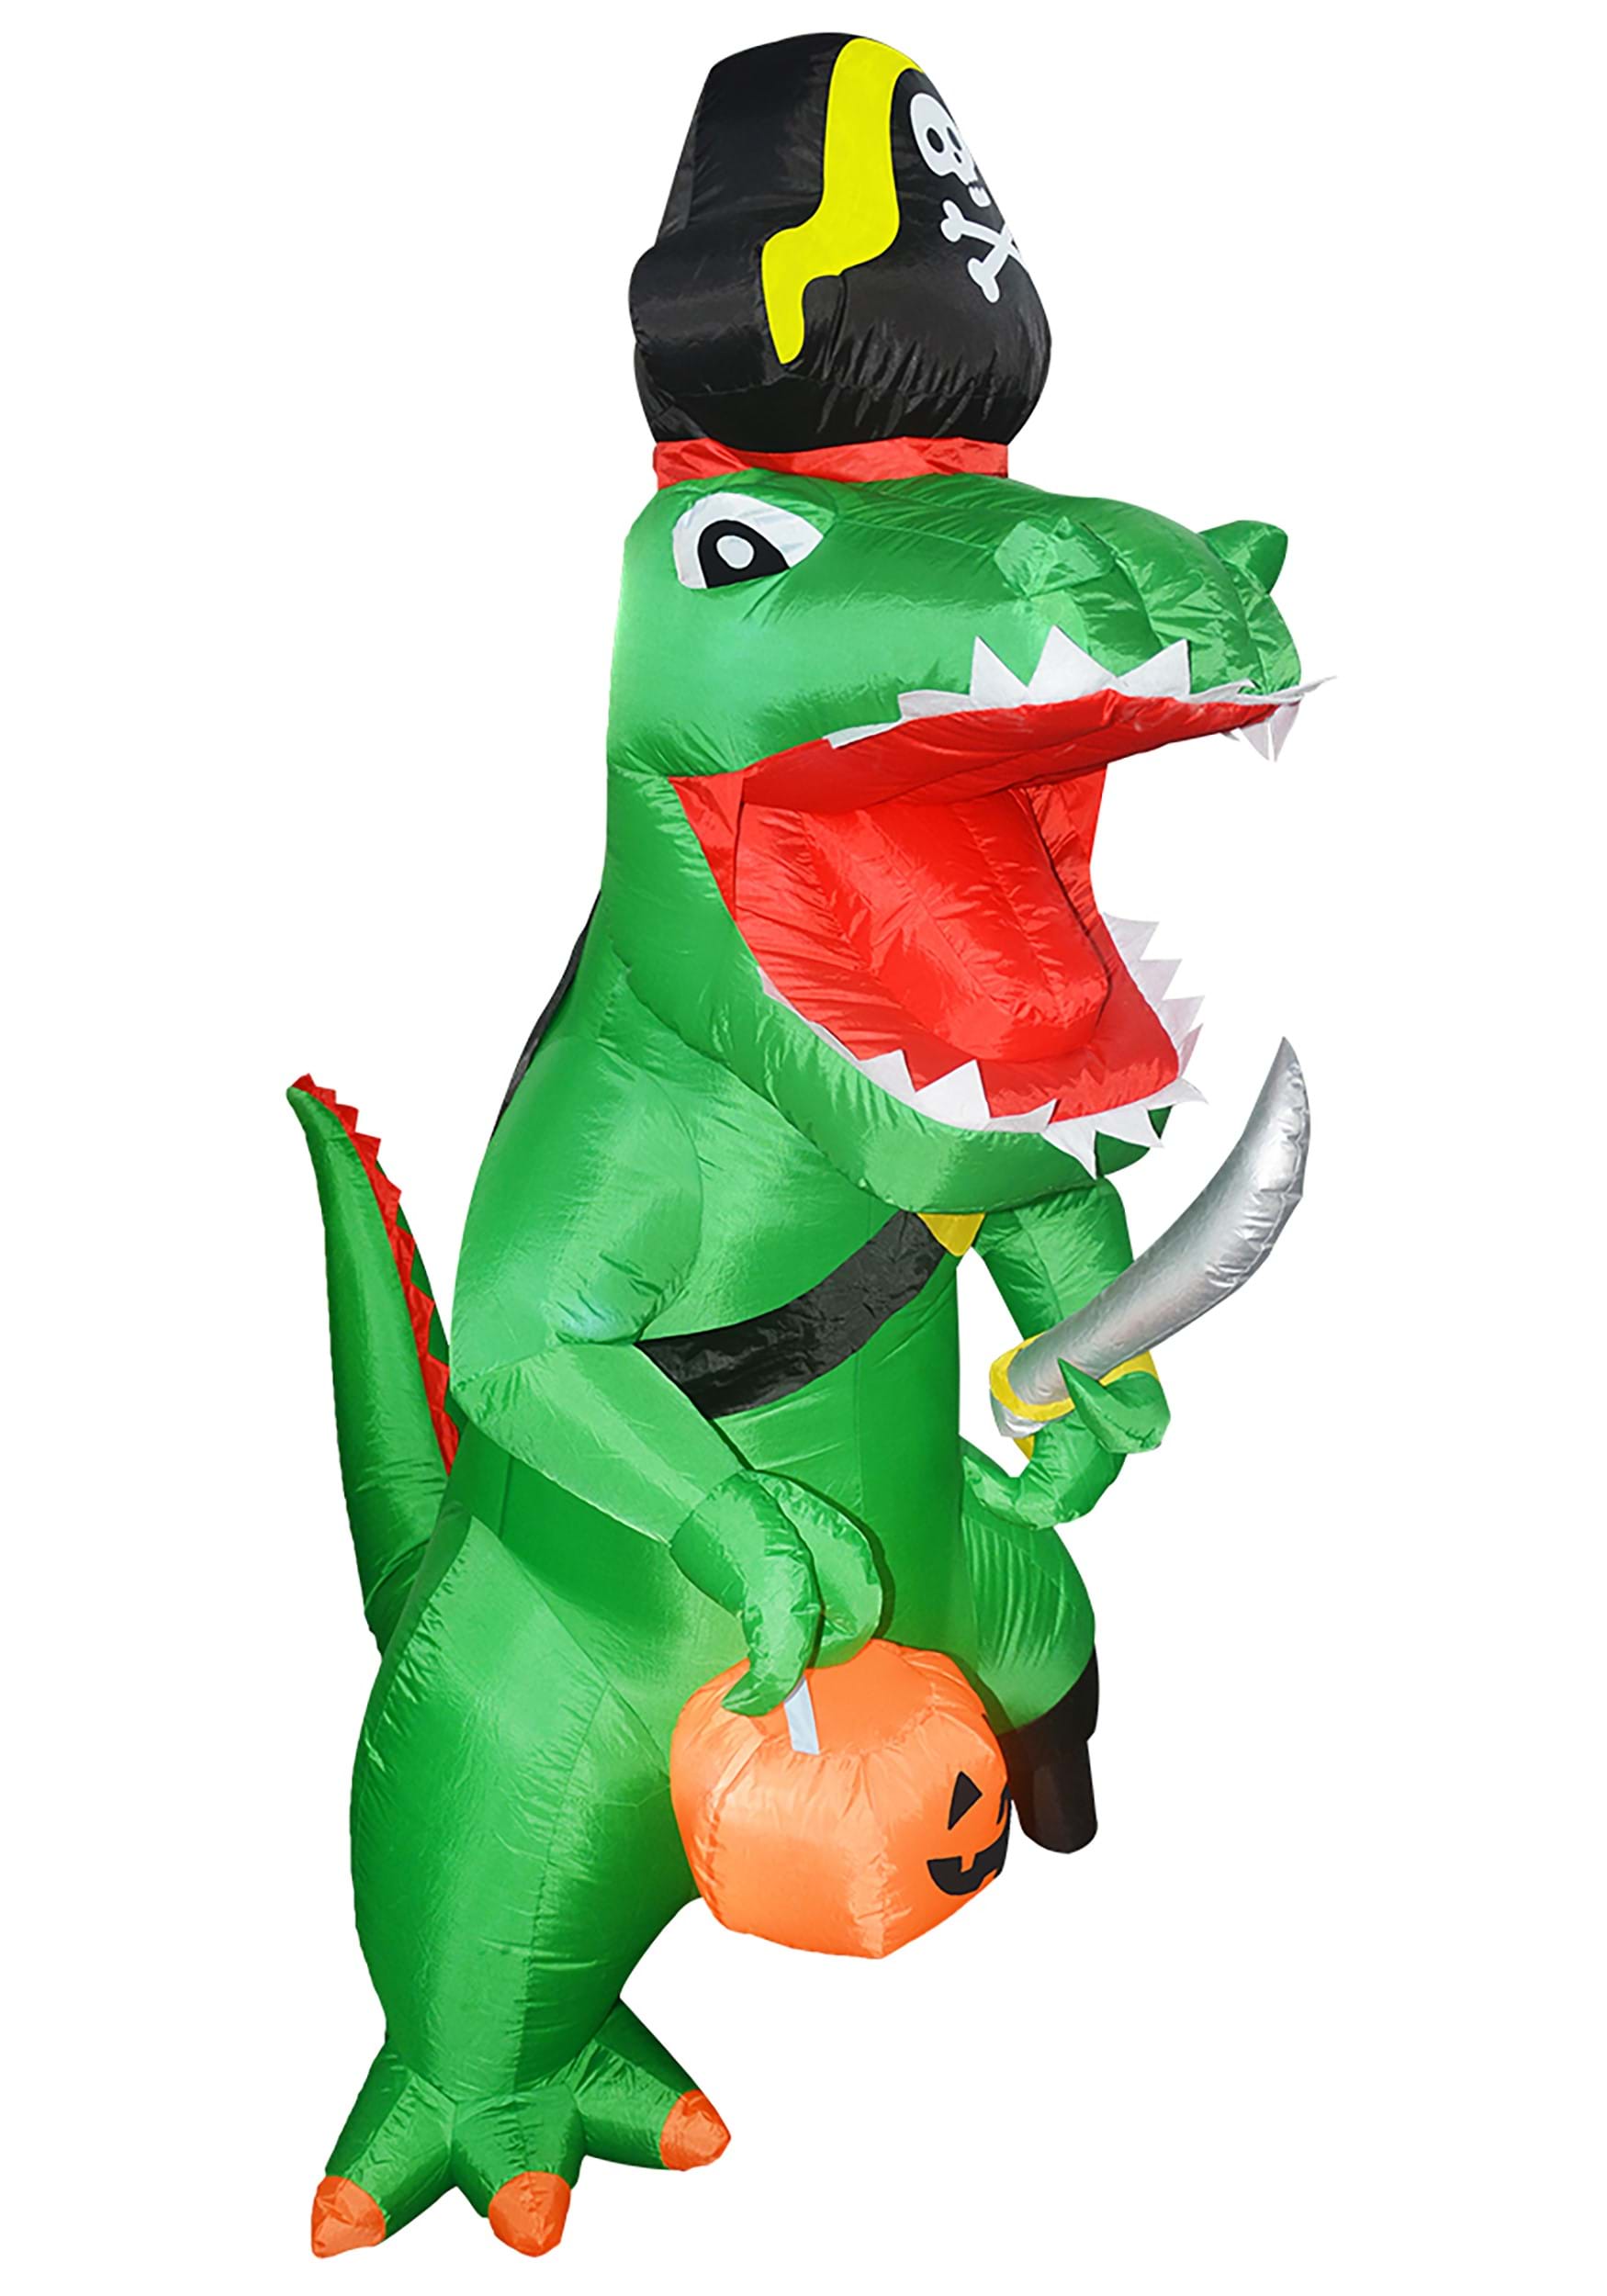 7 Foot Inflatable Pirate Dinosaur Decoration